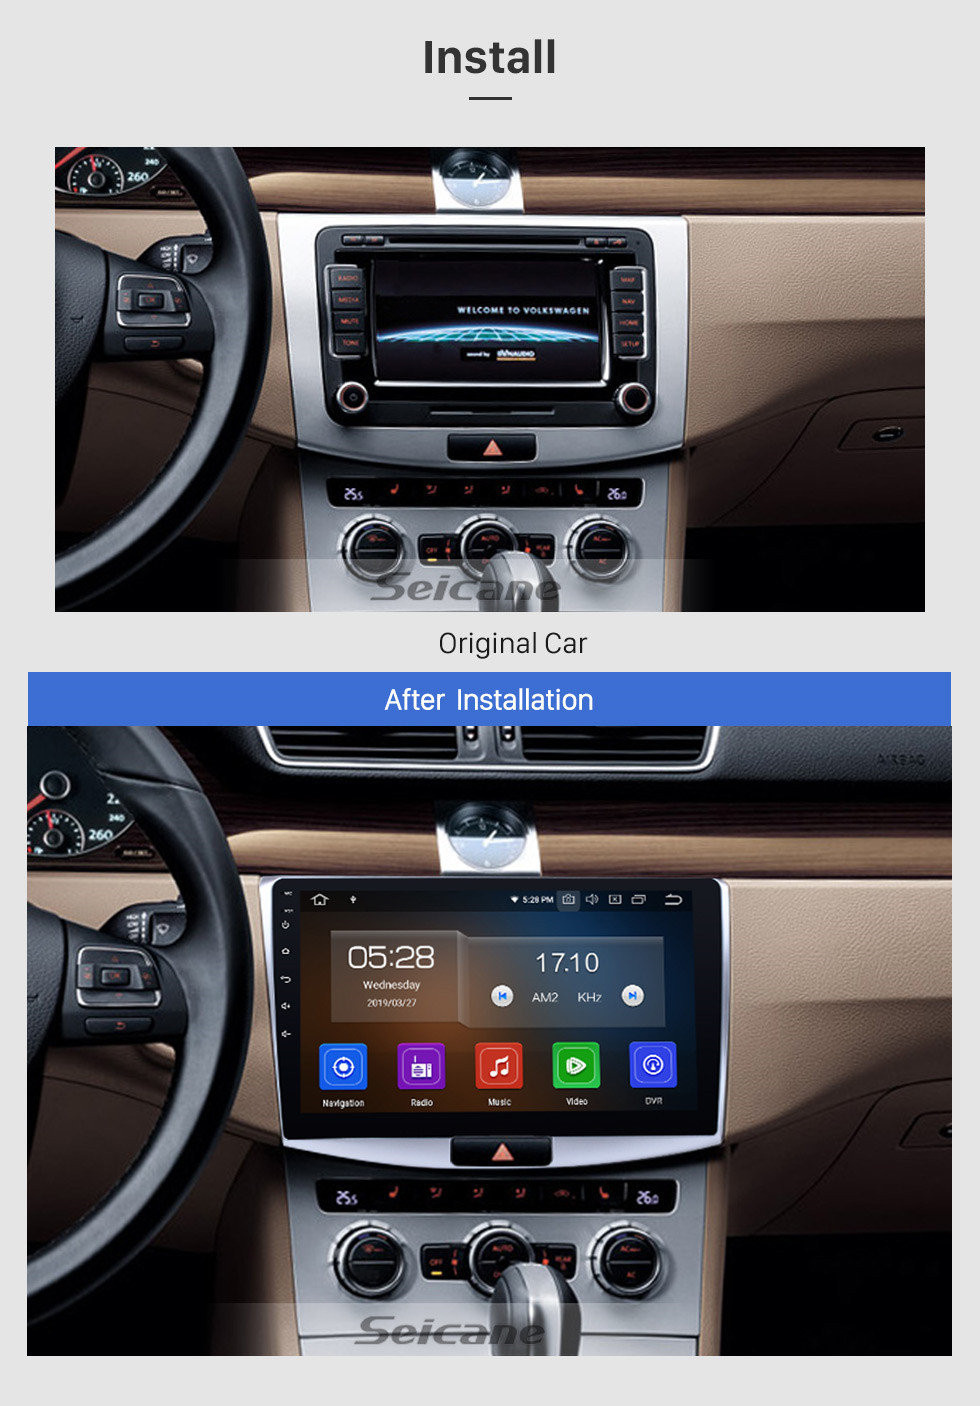 Seicane 10.1 inch 1024*600 touchscreen 2012 2013 2014 VW Volkswagen Magotan Radio Removal with Android 11.0 in Dash GPS Bluetooth Car Audio System 3G WiFi CD DVD Player OBD2 Mirror Link Steering Wheel Control